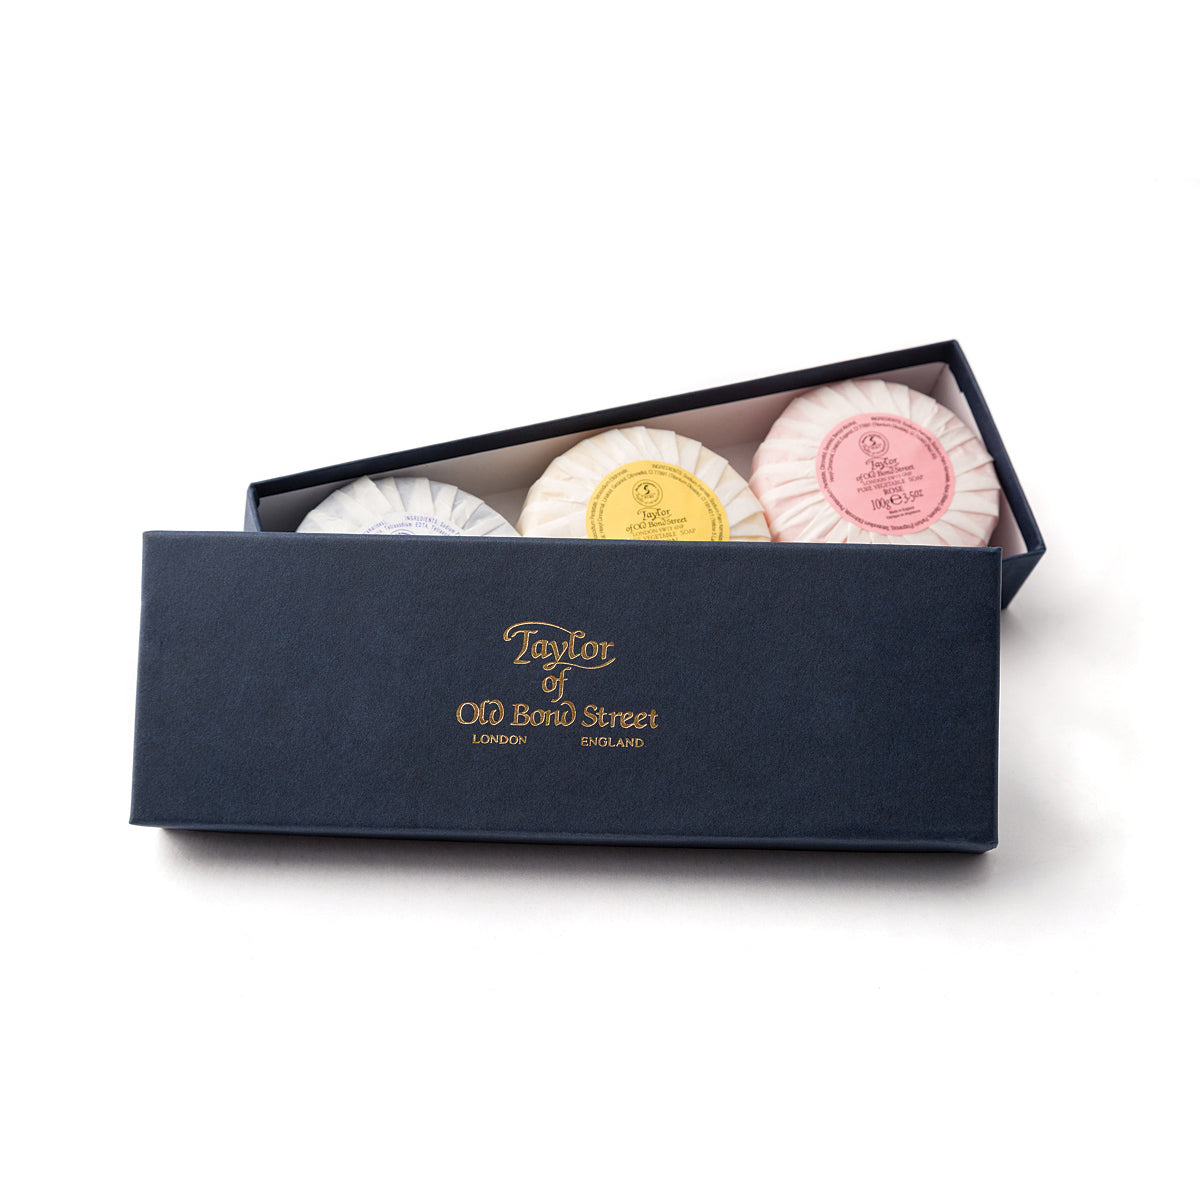 Mixed Hand Soap Gift Box from Taylor of Old Bond Street